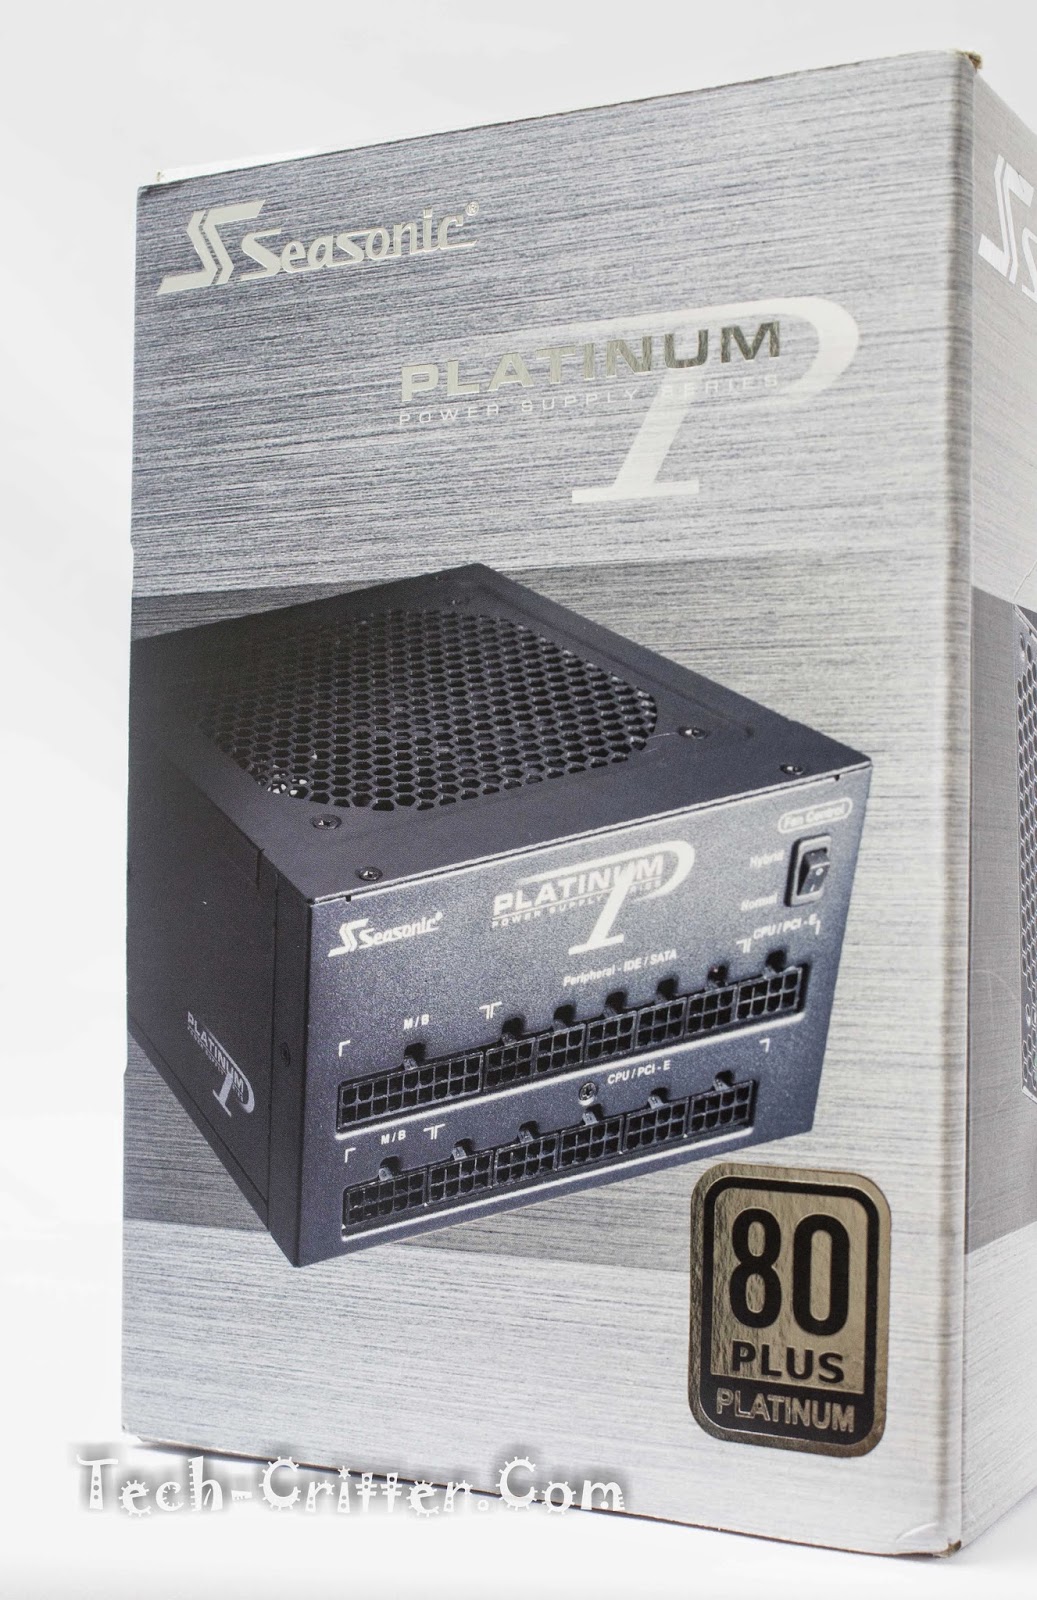 Unboxing & Overview: Seasonic Platinum Series 860W Power Supply Unit 12